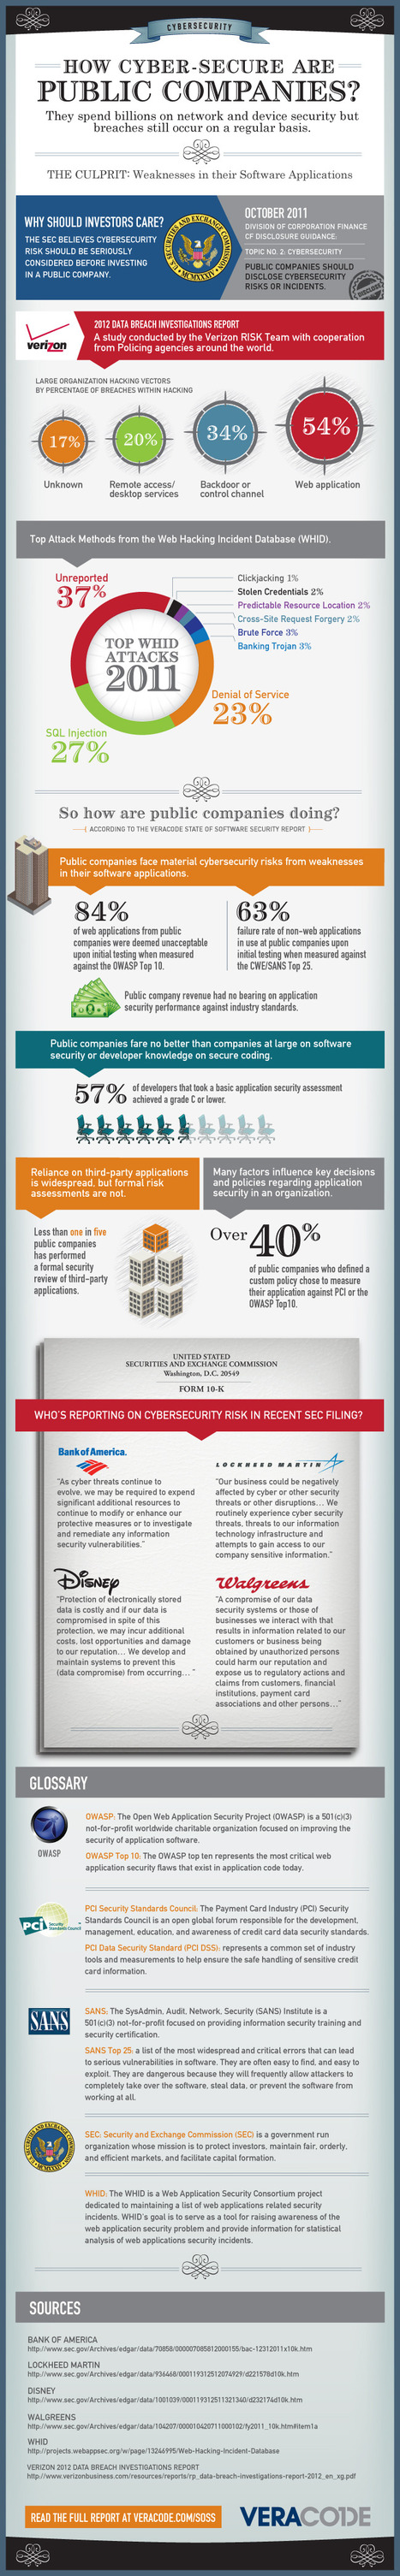 Infographic: How cyber-secure are public companies? | Information Technology & Social Media News | Scoop.it